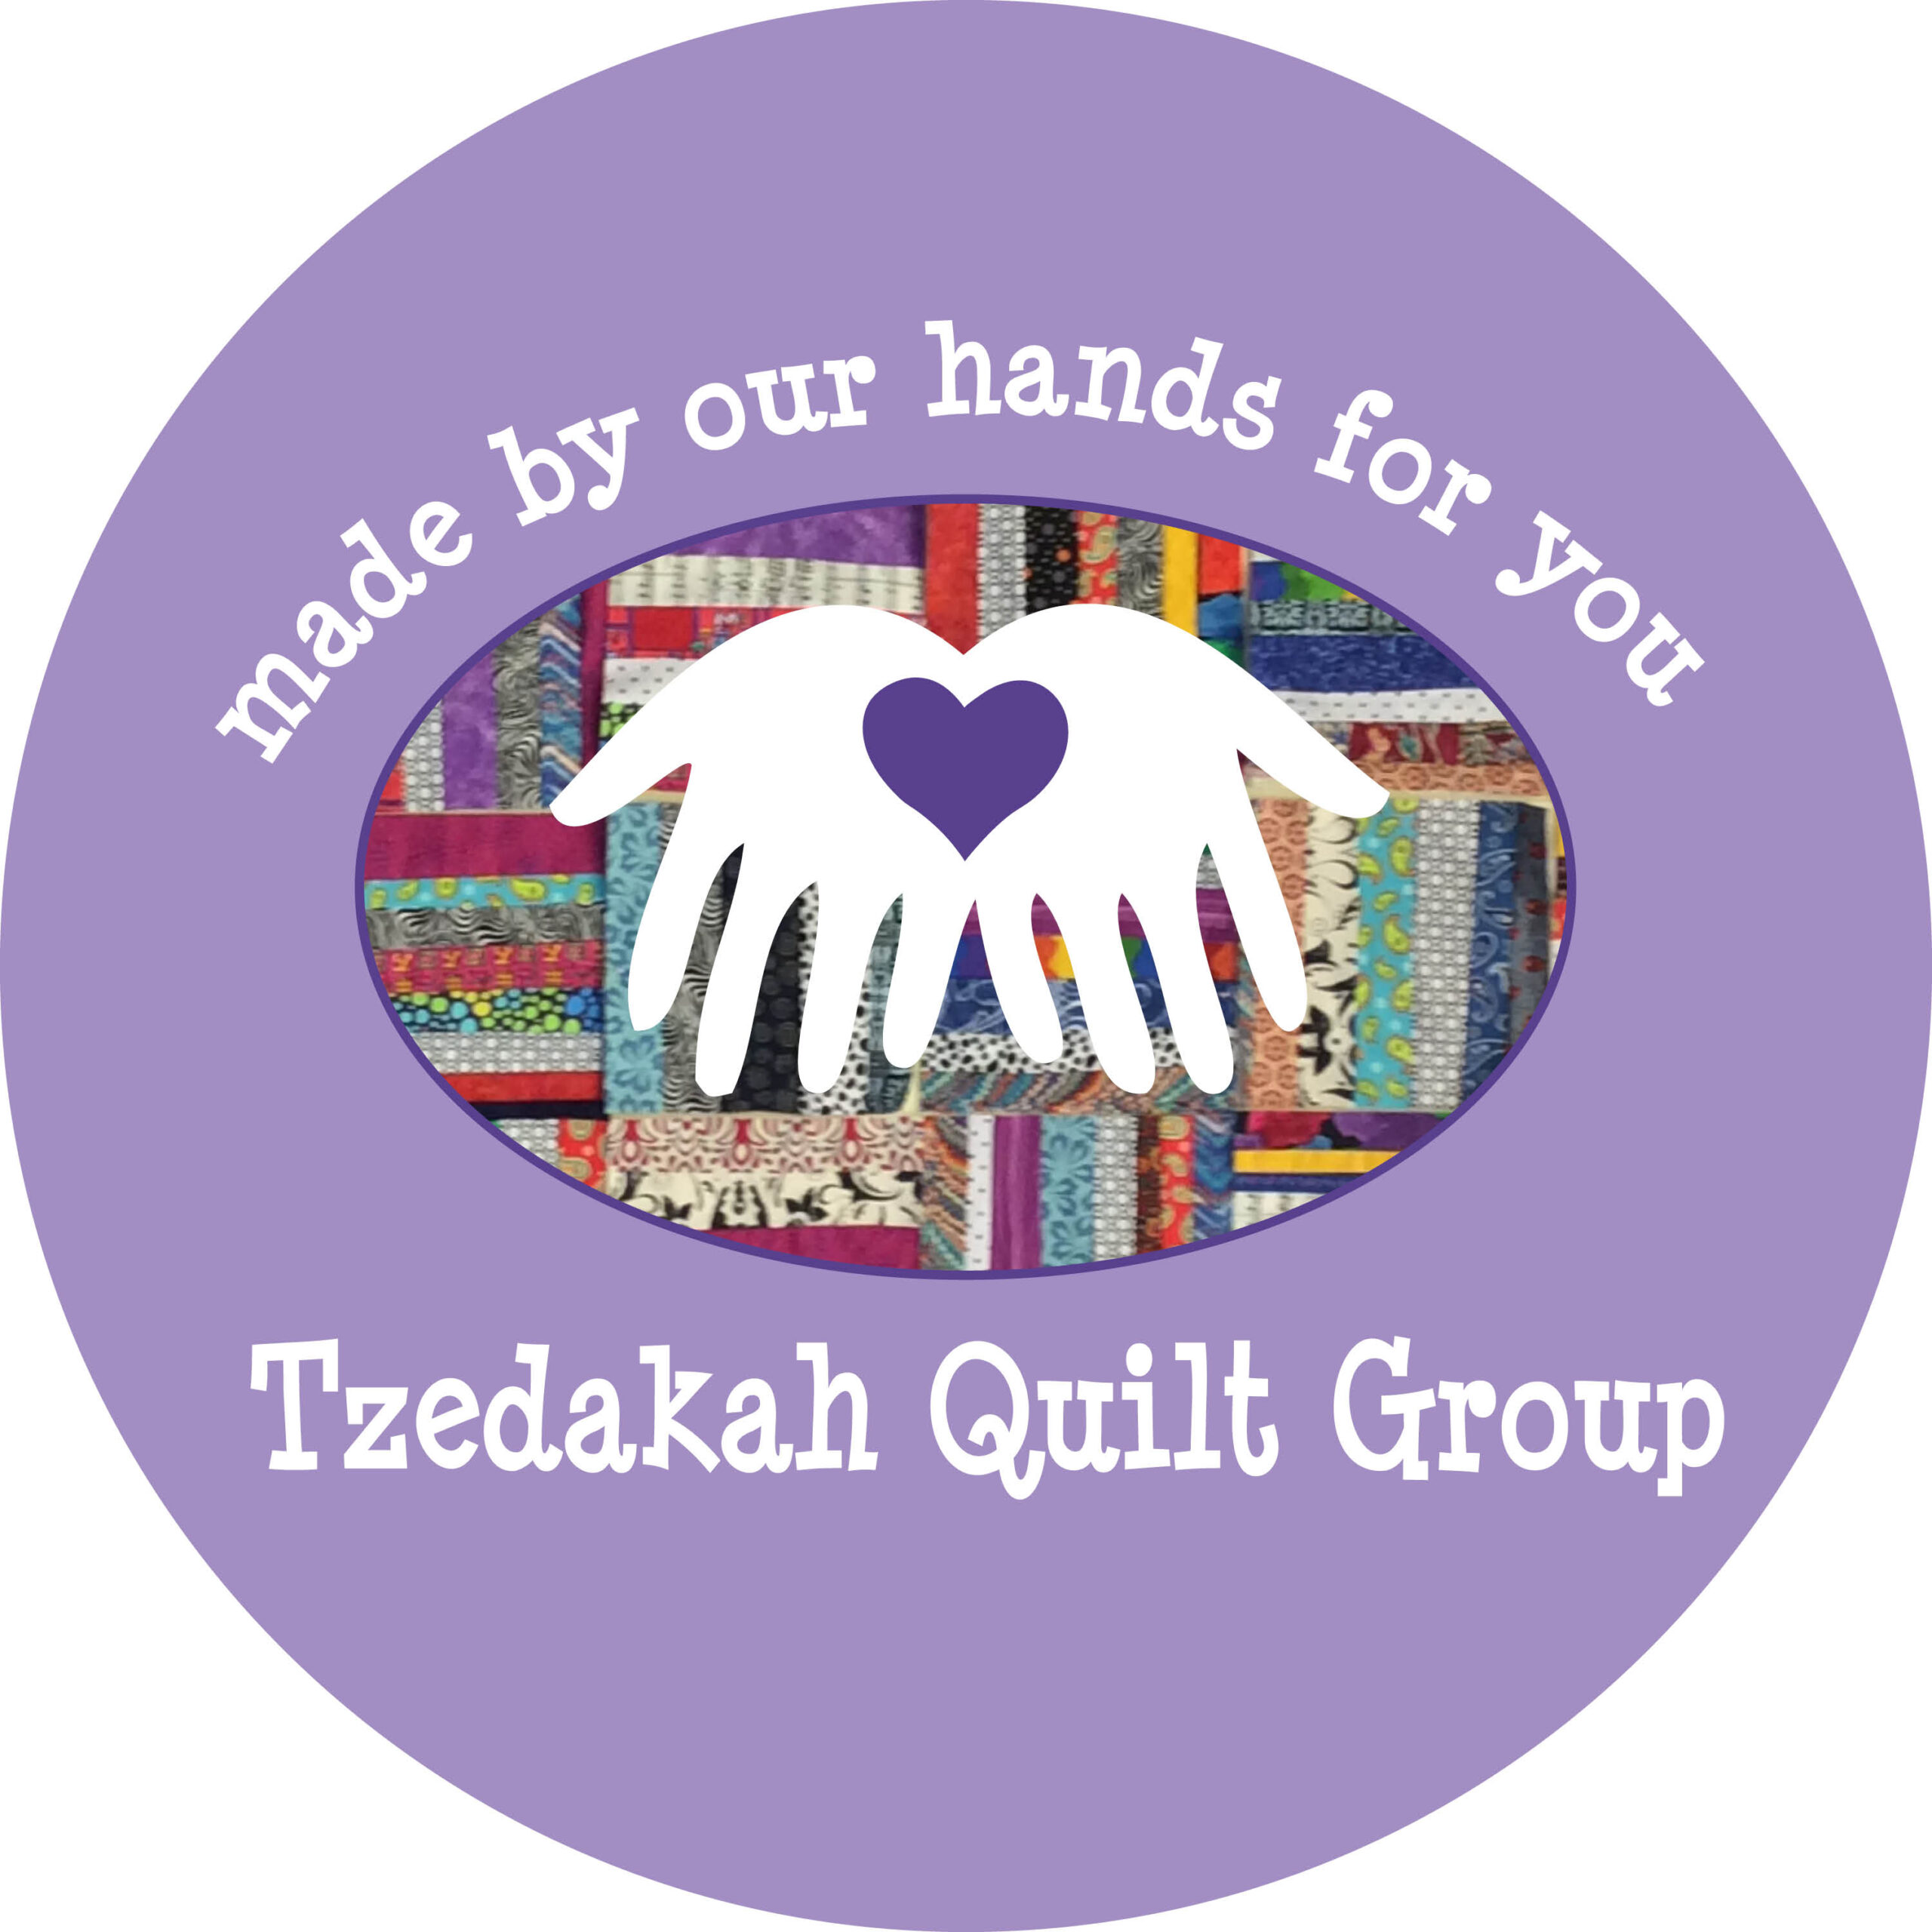 Quilting Group